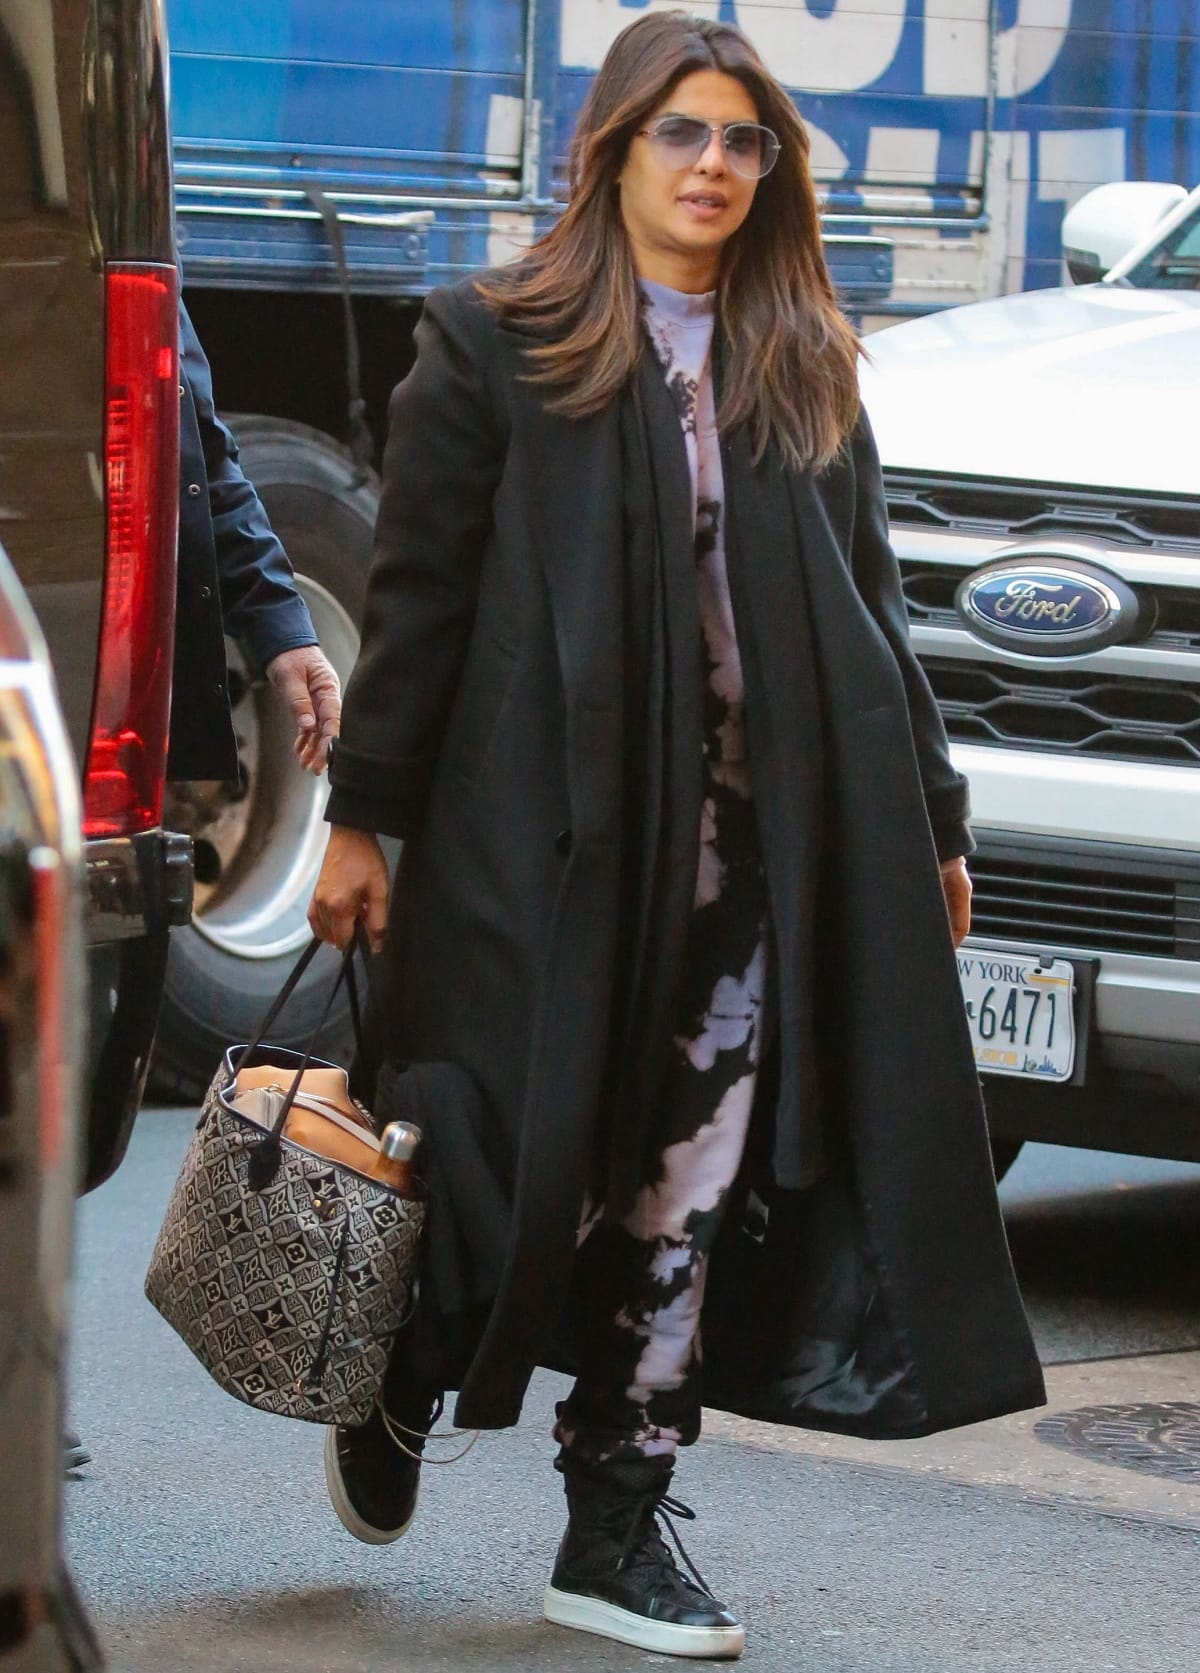 Priyanka Chopra wearing a purple-and-black spotted sweatsuit layered under an oversized black trench coat while out and about in New York City